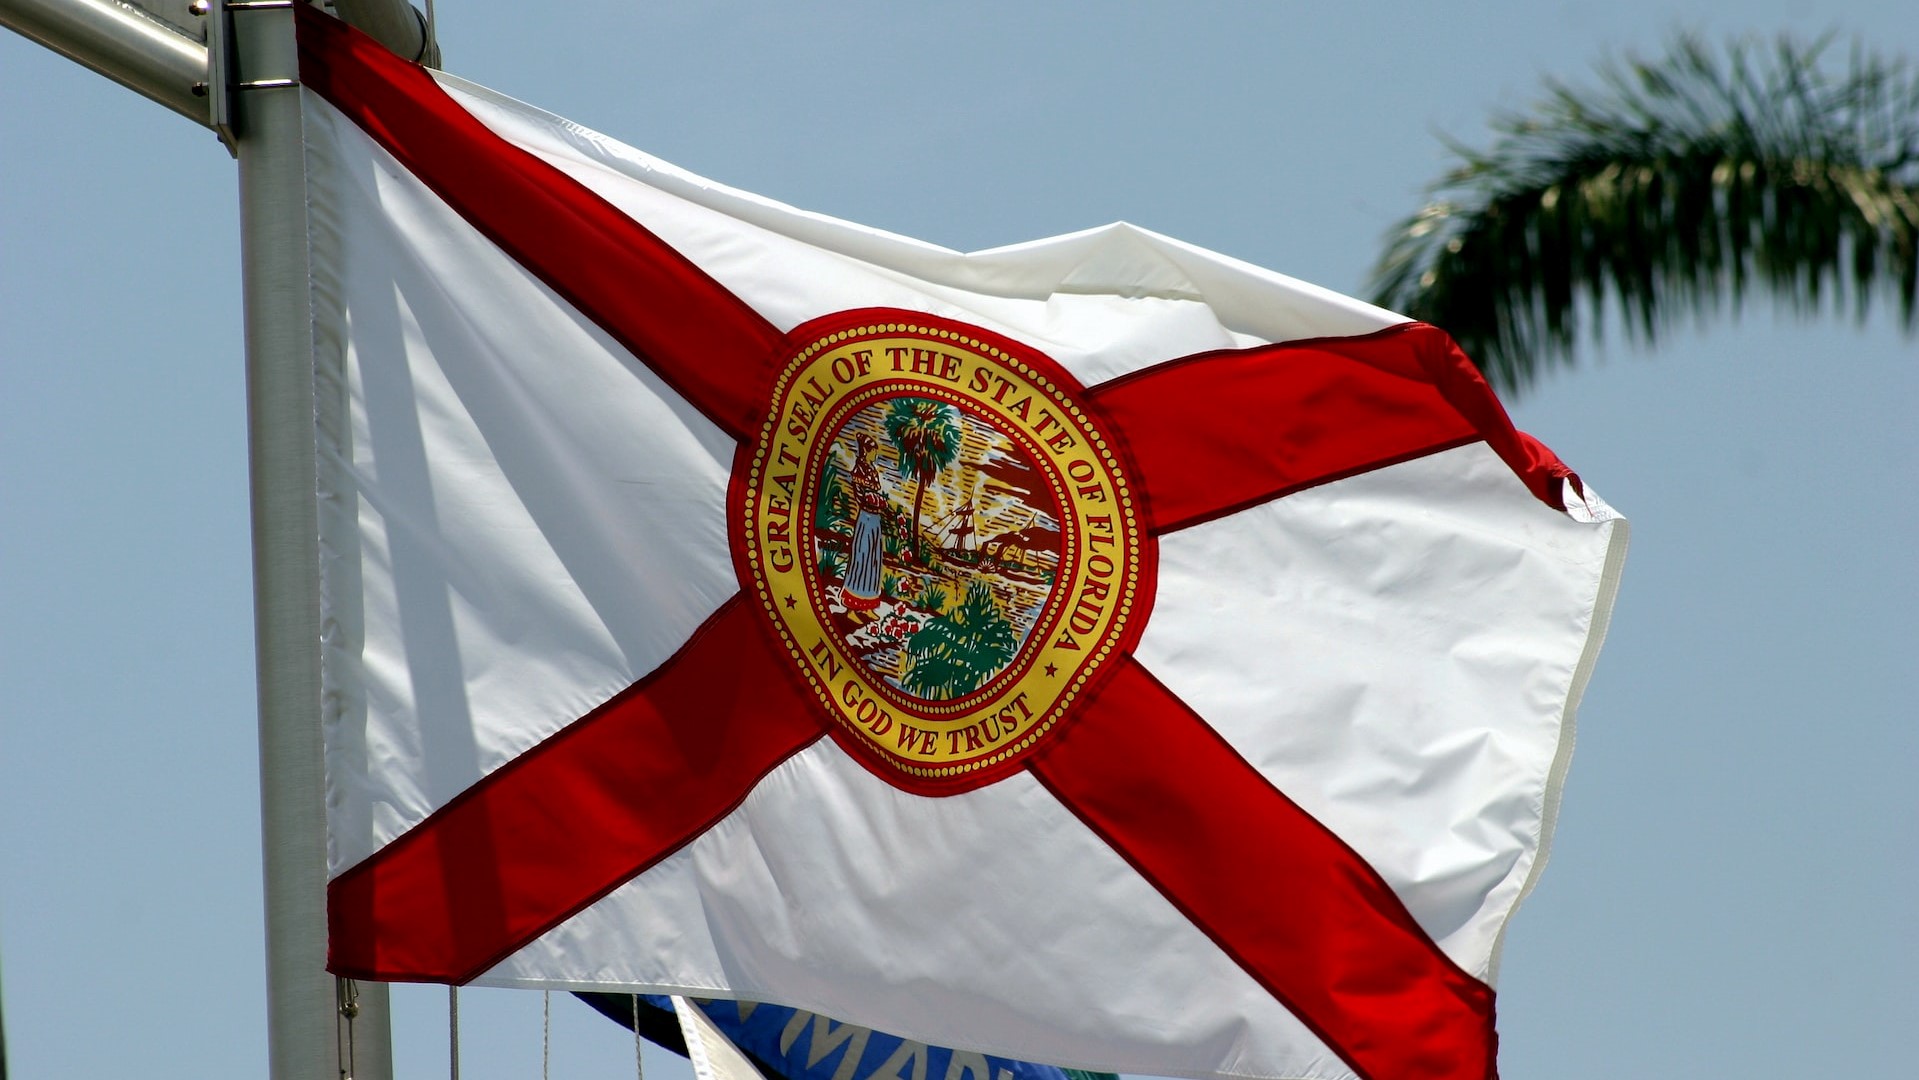 The state flag of Florida flies on a ship's mast | Veteran Car Donations